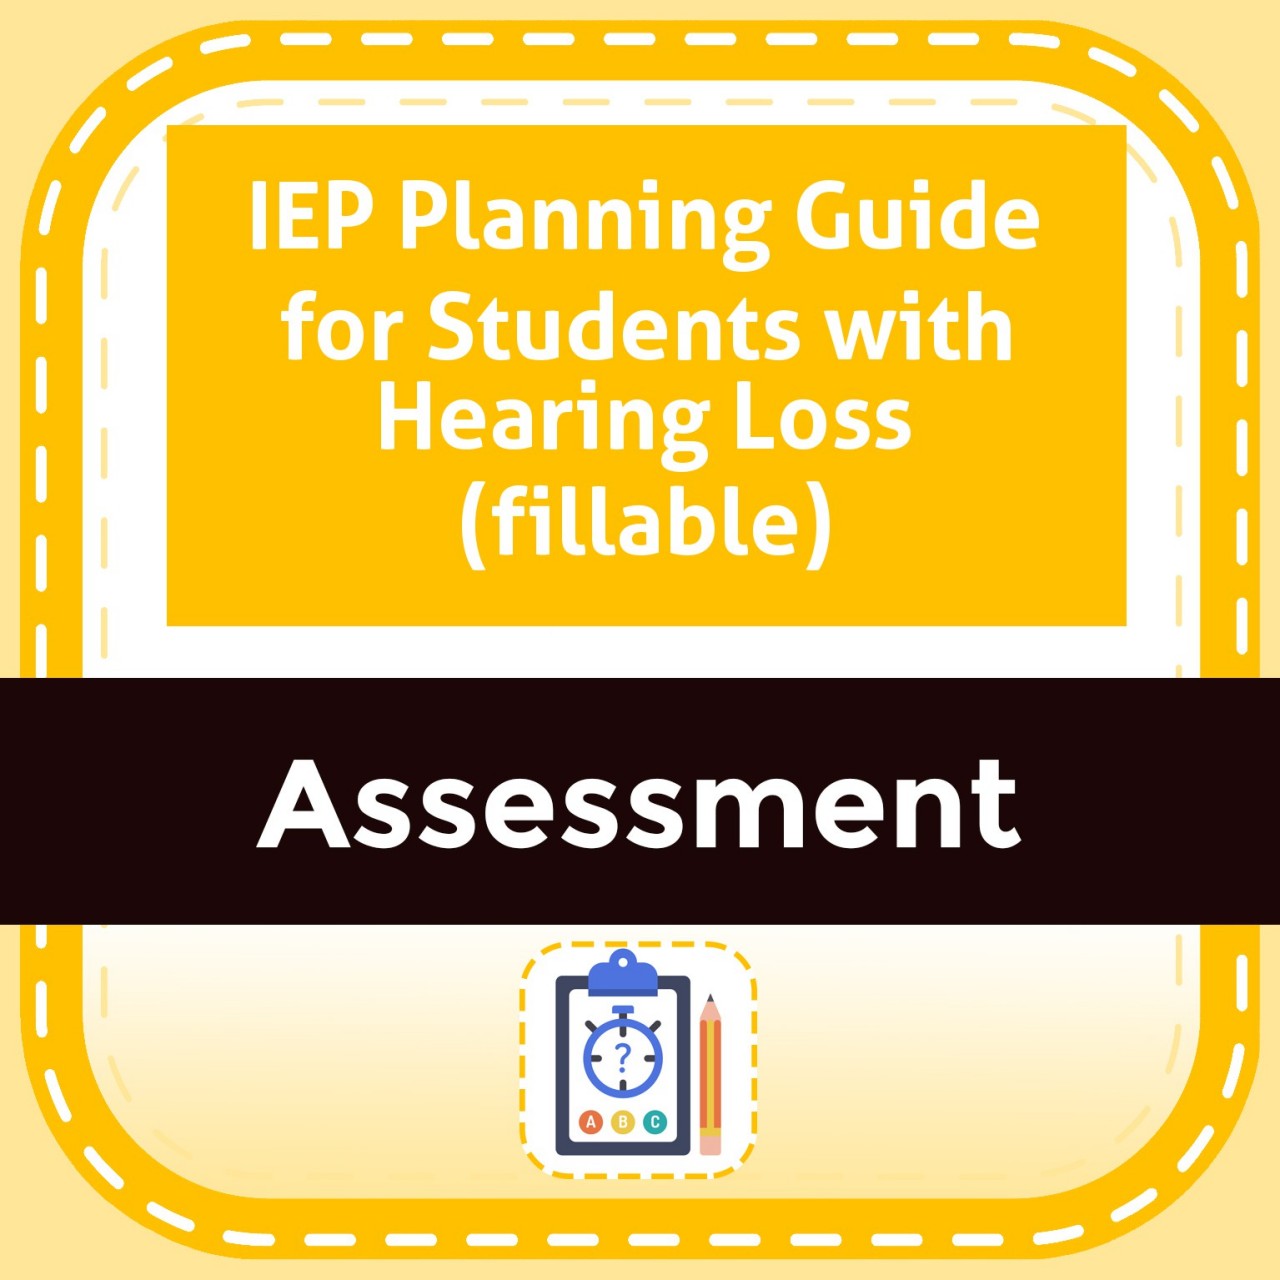 IEP Planning Guide for Students with Hearing Loss (fillable)